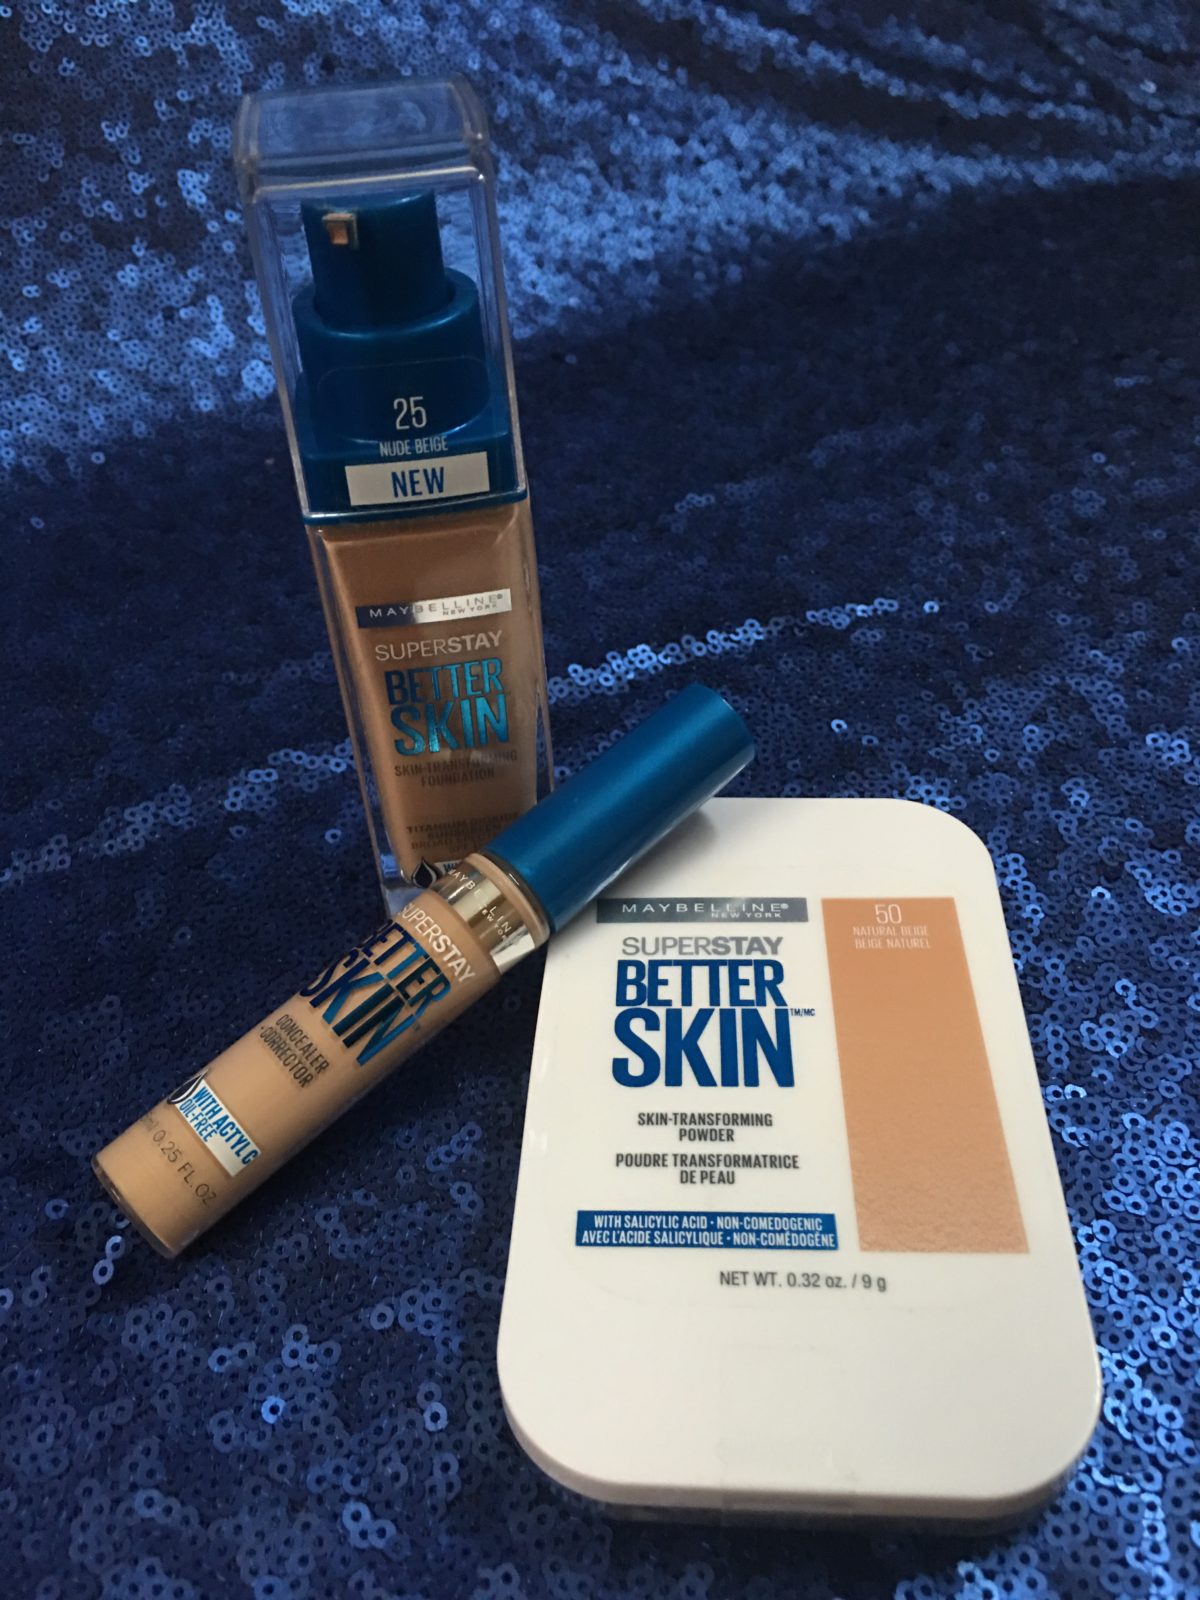 REVIEW: Maybelline SuperStay Better Skin